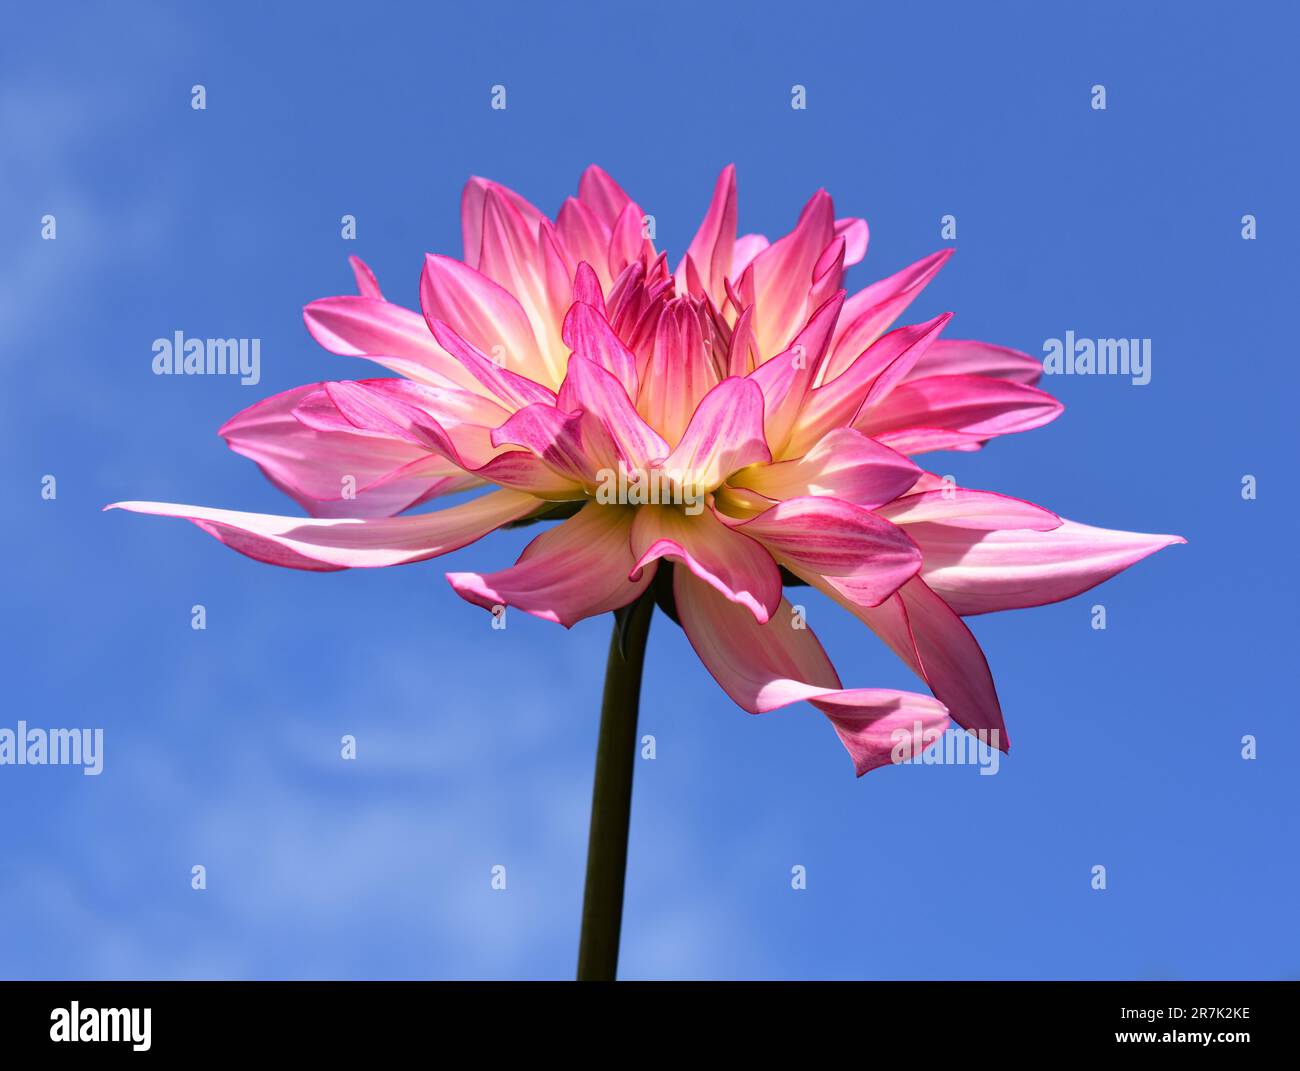 Closeup on a pink and yellow columbine Dahlia flower on blue sky background Stock Photo